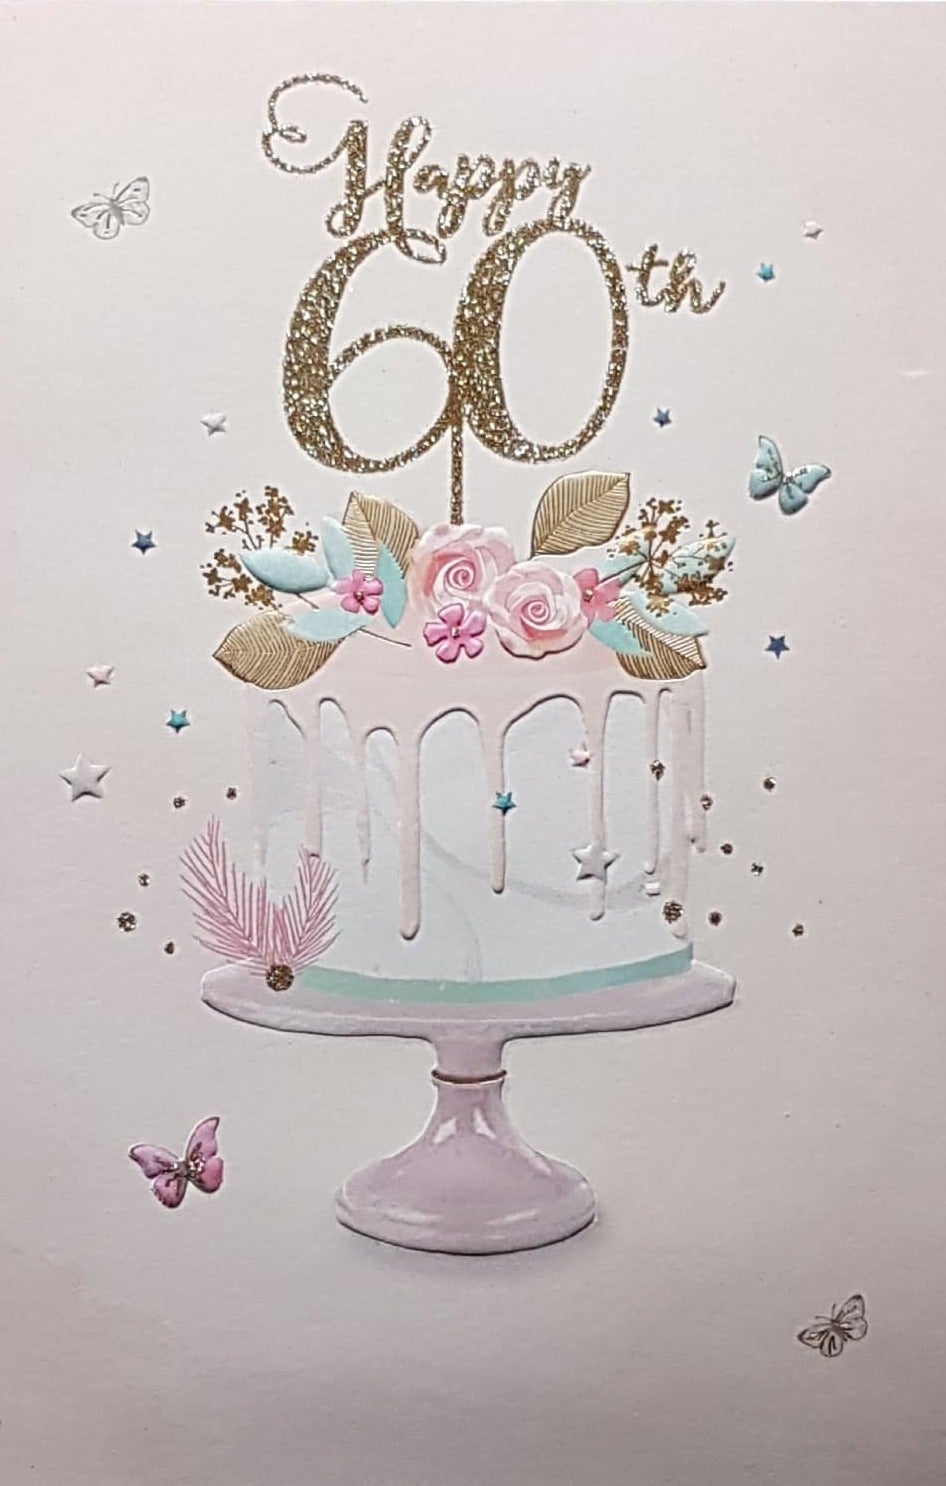 Age 60 Birthday Card - A Pretty Cake With Pink Flowers & Butterflies